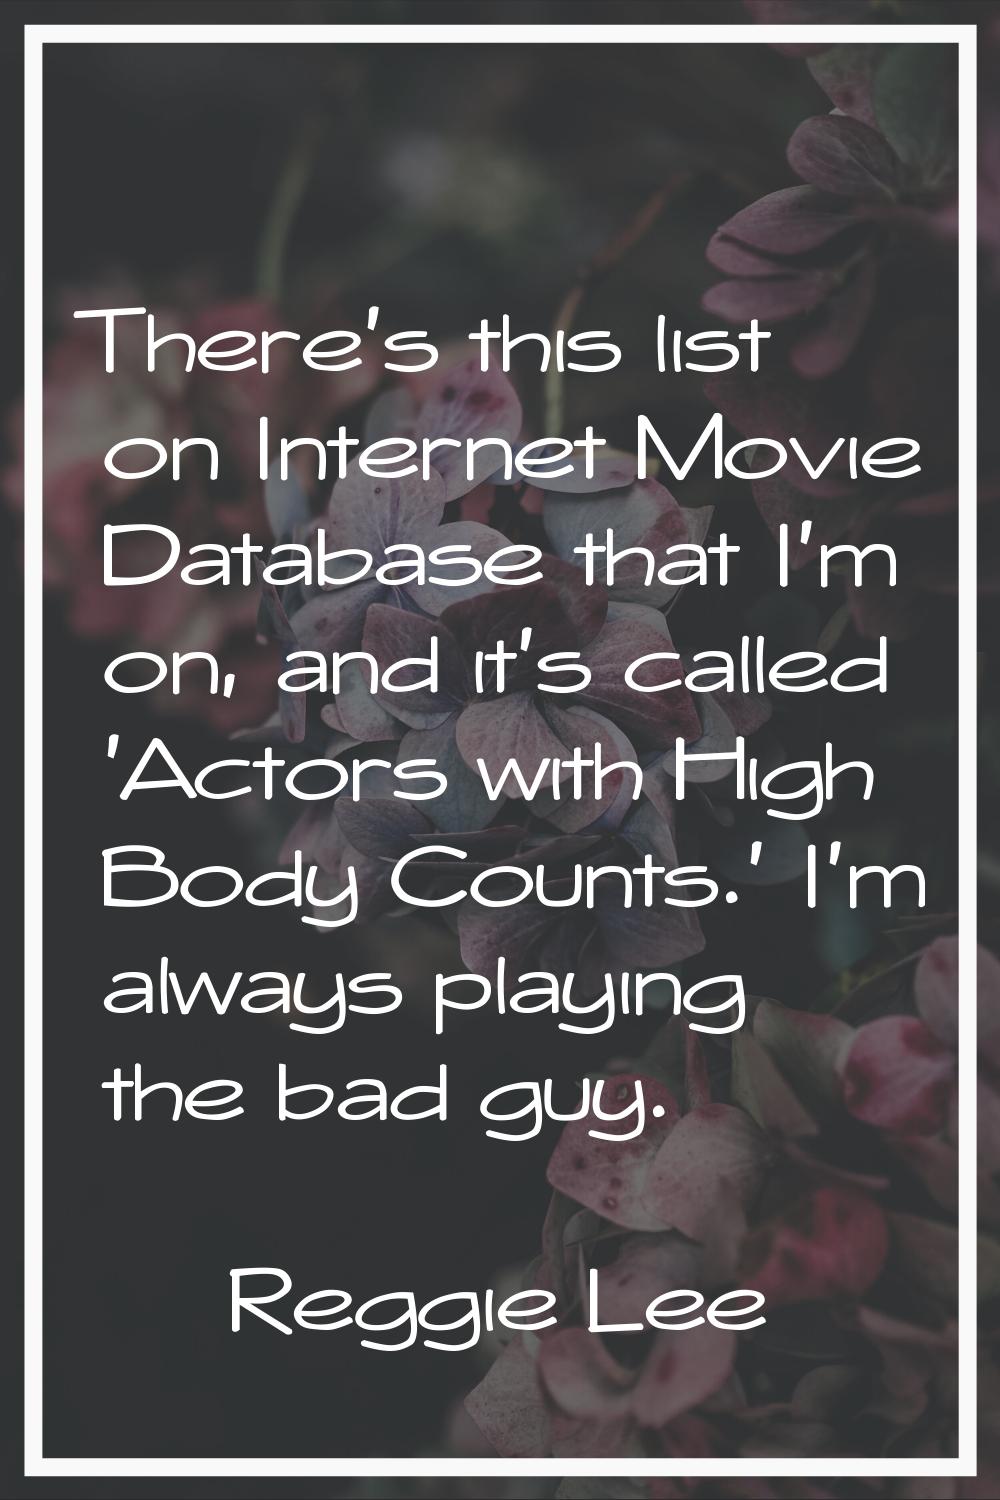 There's this list on Internet Movie Database that I'm on, and it's called 'Actors with High Body Co